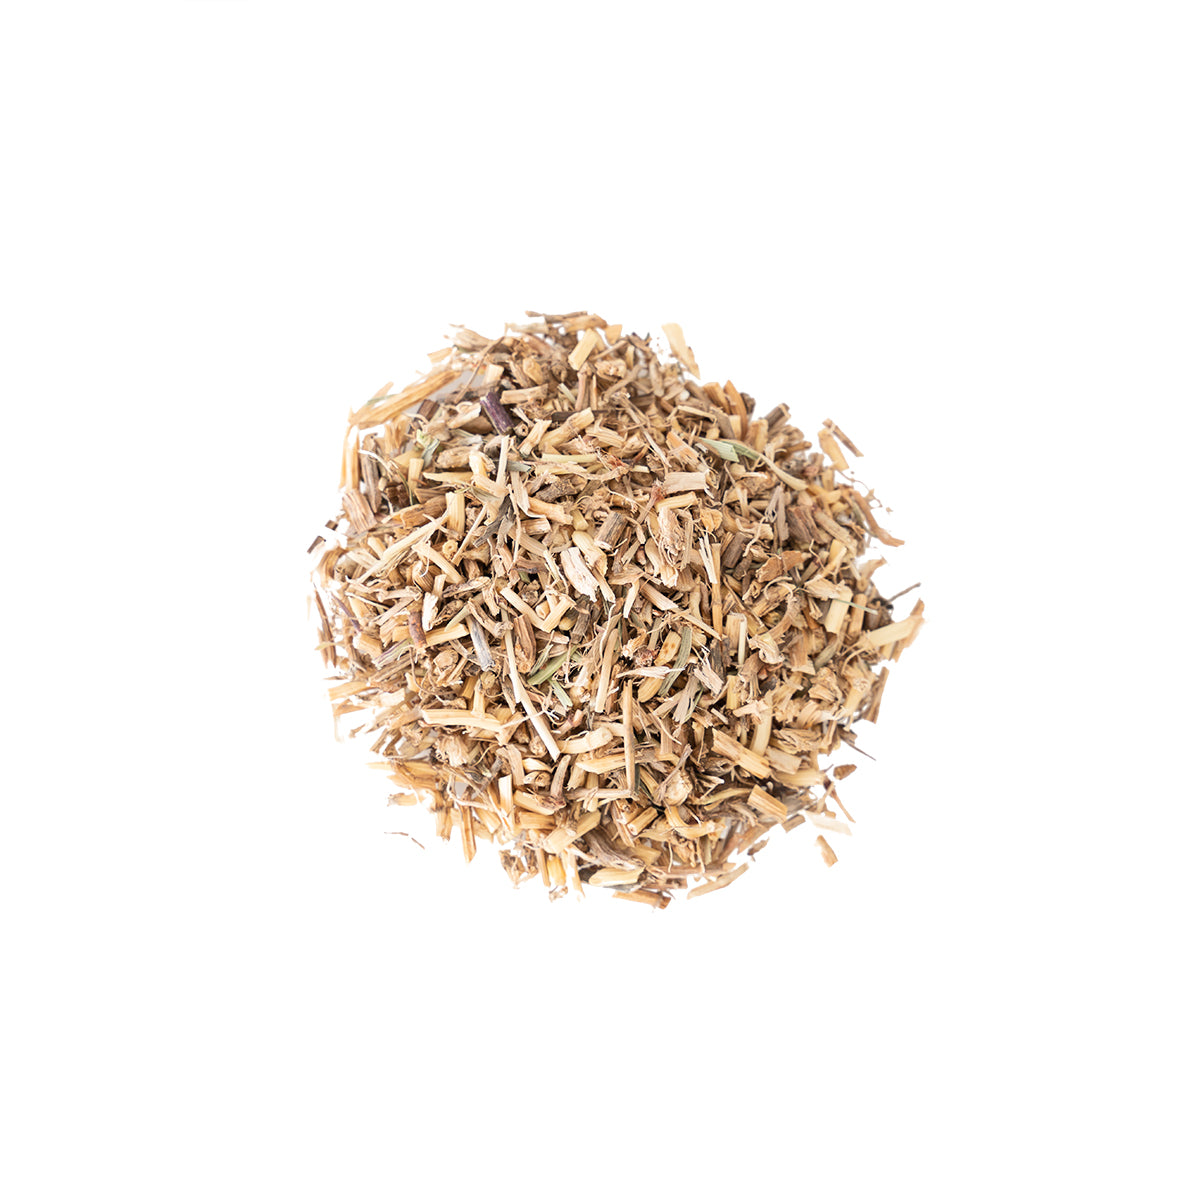 Primary Image of Couch Grass - Cut (Agropyron repens - Elymus repens)